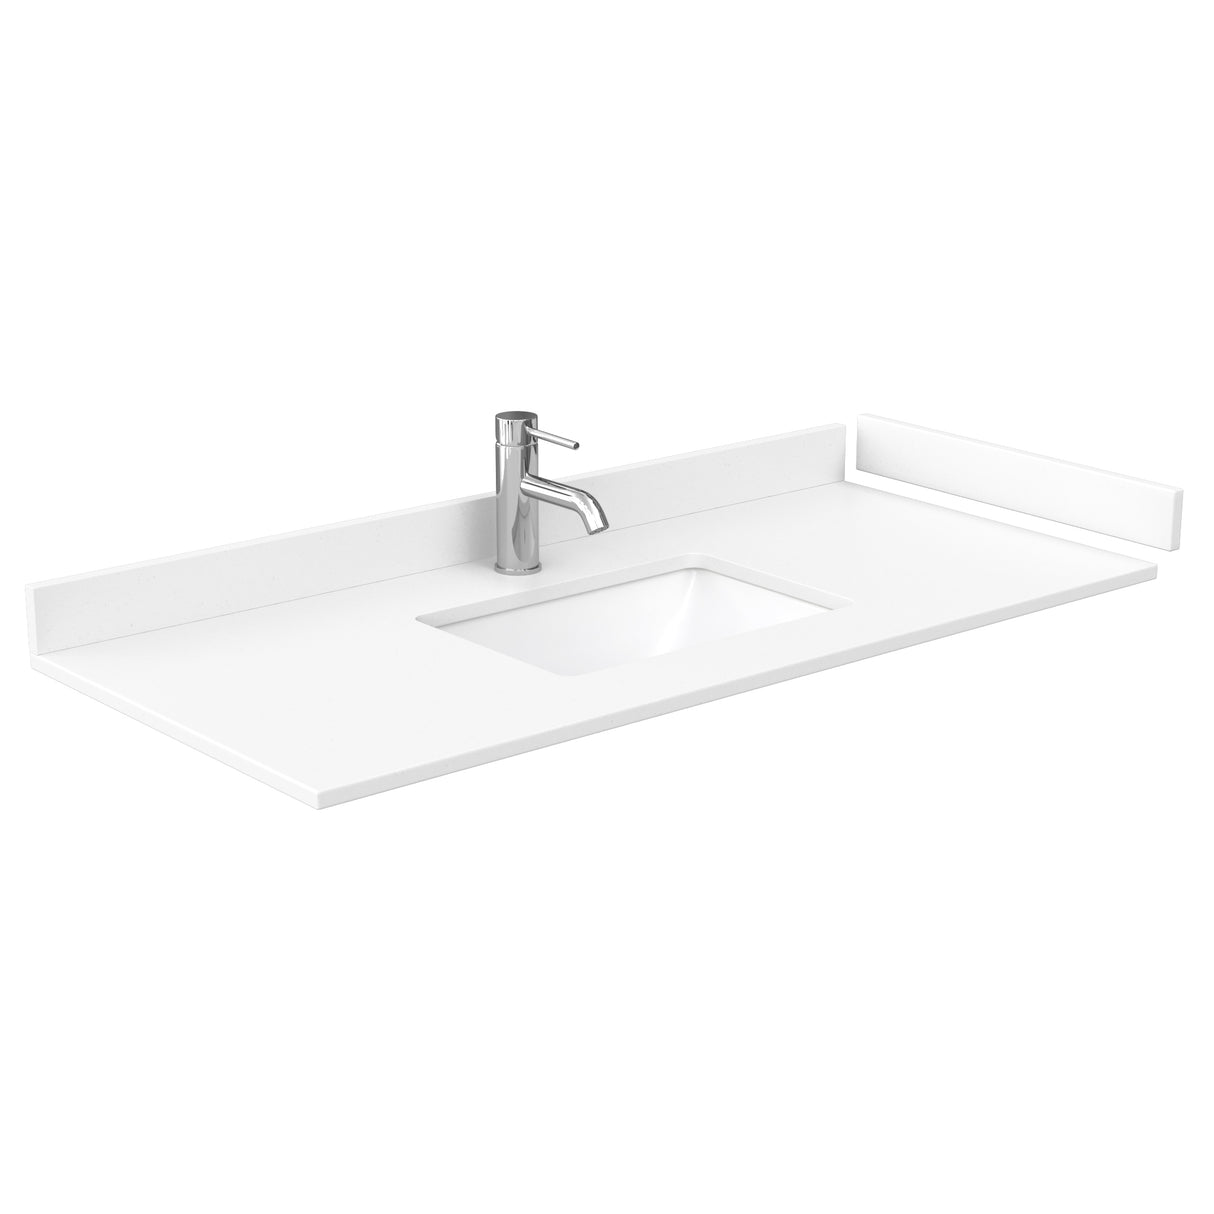 Beckett 48 Inch Single Bathroom Vanity in White White Cultured Marble Countertop Undermount Square Sink Brushed Nickel Trim